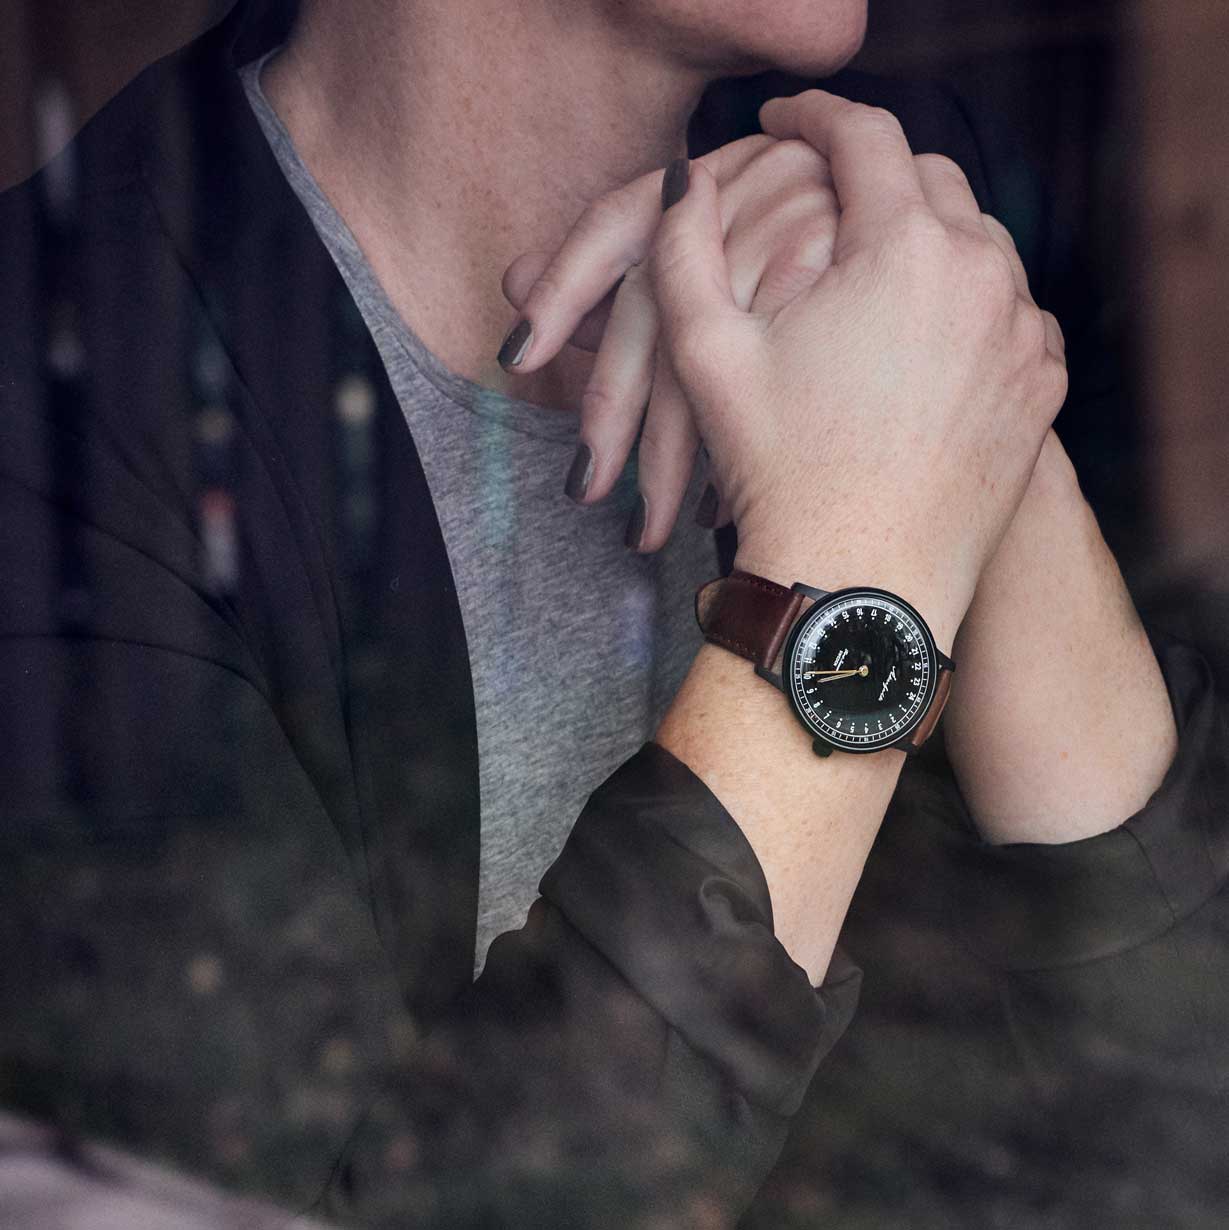 24-hour watch with matte black case and brown leather strap